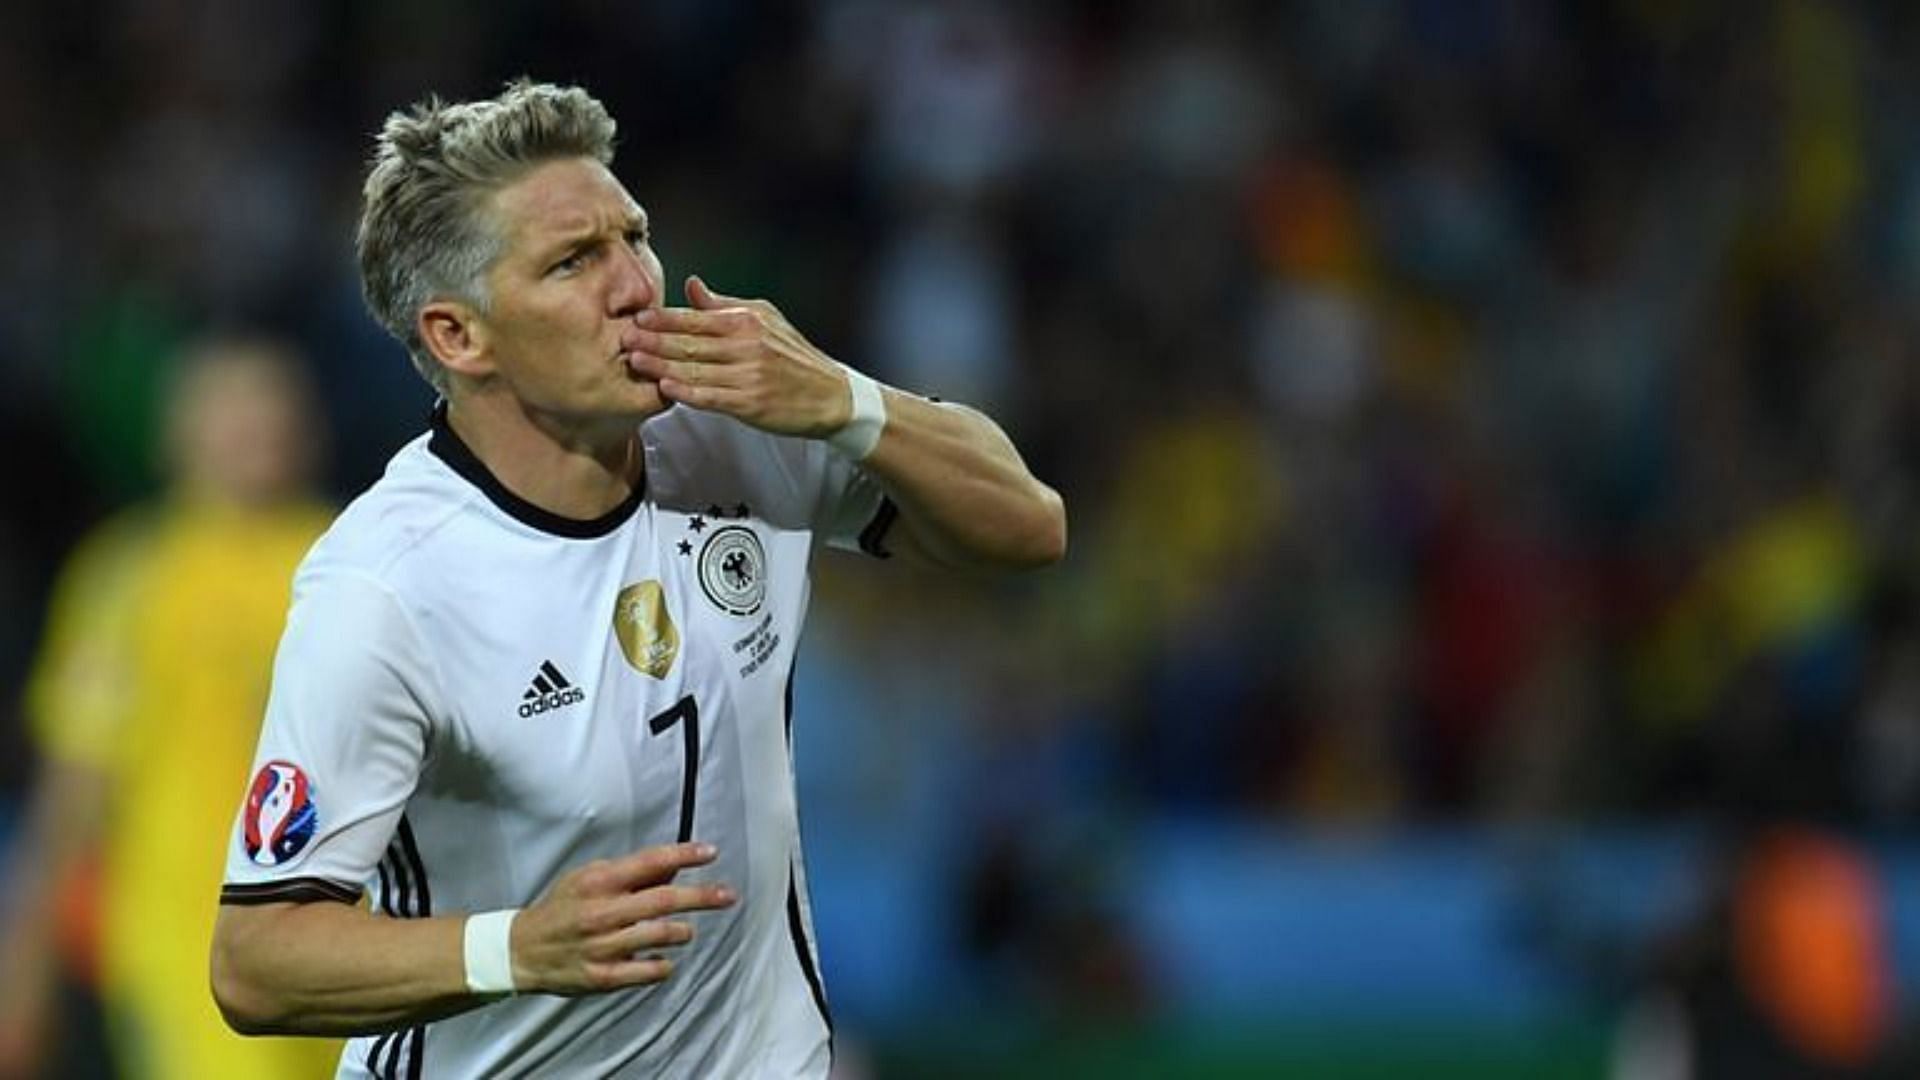 Schweinsteiger was a great midfielder for club and country.